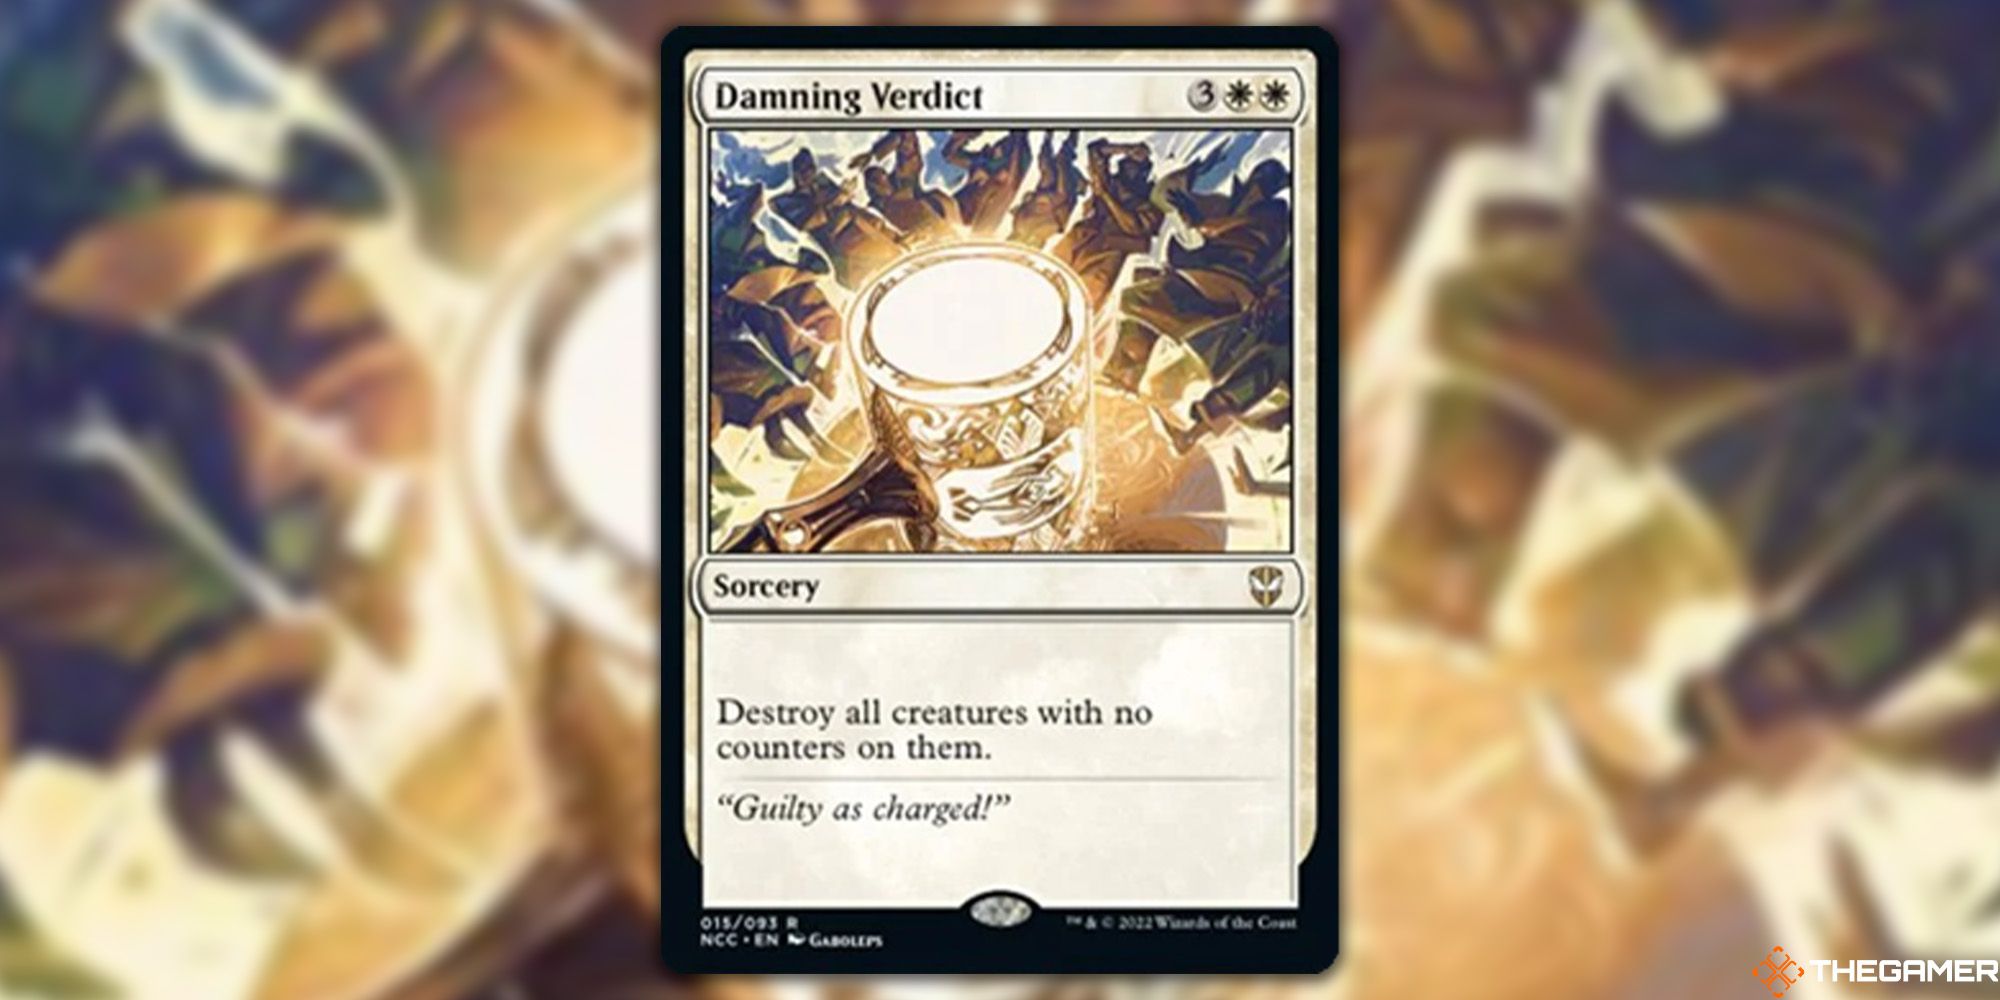 Image of the Damning Verdict card in Magic: The Gathering, with art by Gaboleps